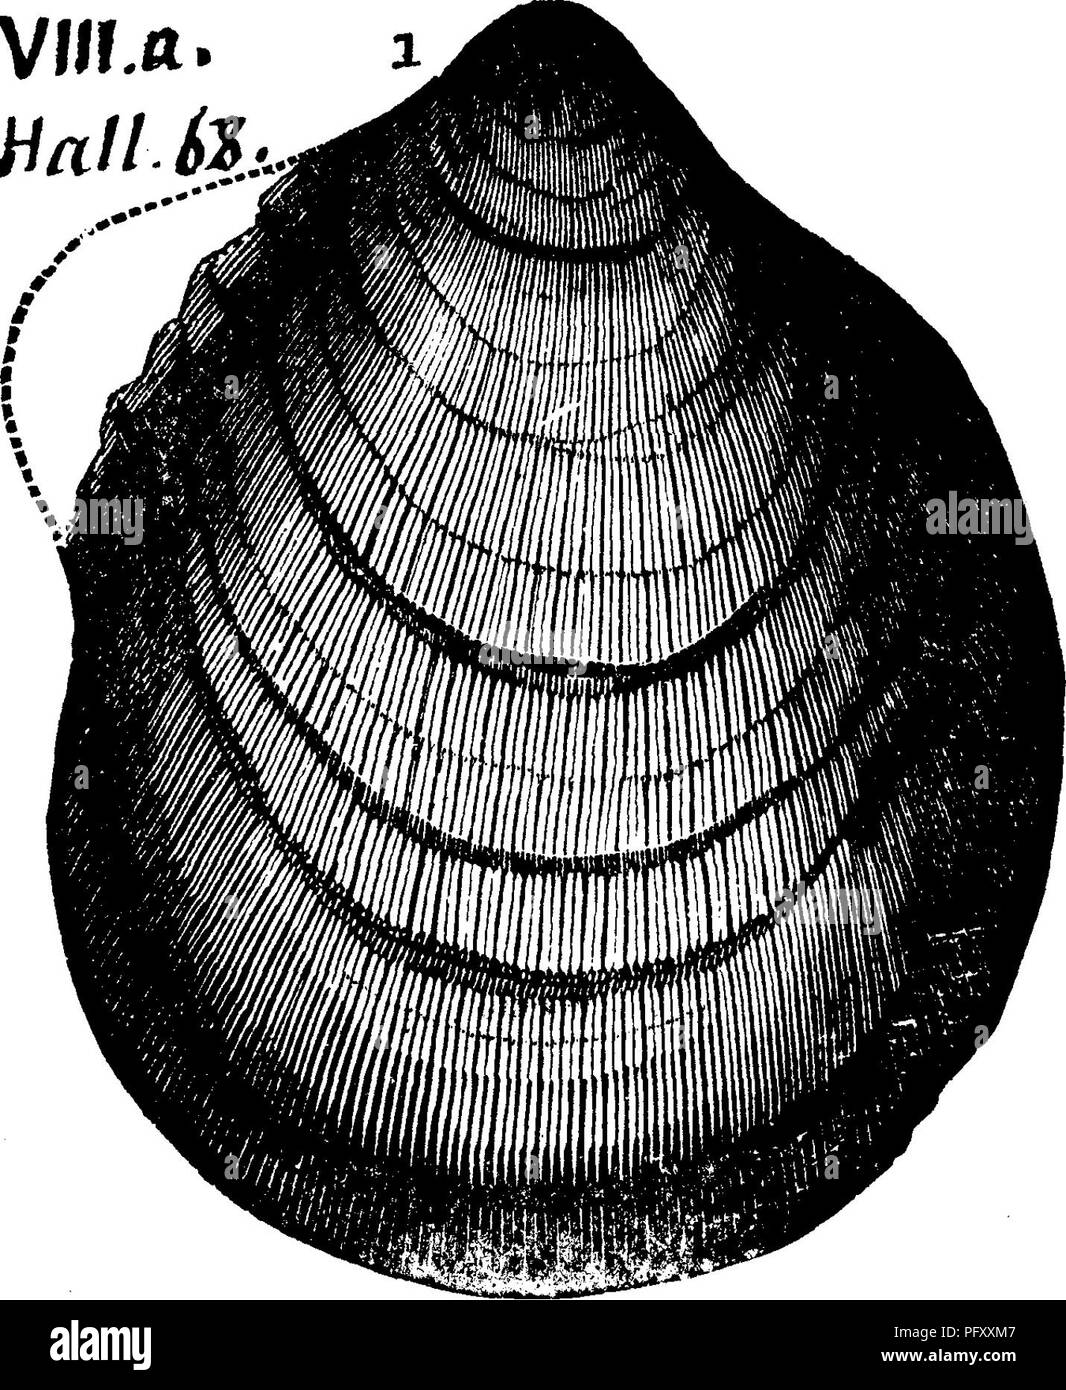 . A dictionary of the fossils of Pennsylvania and neighboring states named in the reports and catalogues of the survey ... Paleontology. v»r.tt Hall 6^'... or Western District, of New York, 1843, page 172, fig. 68. 1, a perfect speci- men; showing equal valves; hind wing; radiat- ing fine striae; prominent growth lines; large promi- nent beak. Perfect casts were also found at the place (Clarence Hollow, N. Y.). It clo5!ely resembles a Pterinea (Megambonia) of the Oriskany sandstone.— Corniferous (Upper Hel- derherg) limestone forma- tion.— VIII a. Megambonia jamesi, Meek. See Appendix, Megambo Stock Photo